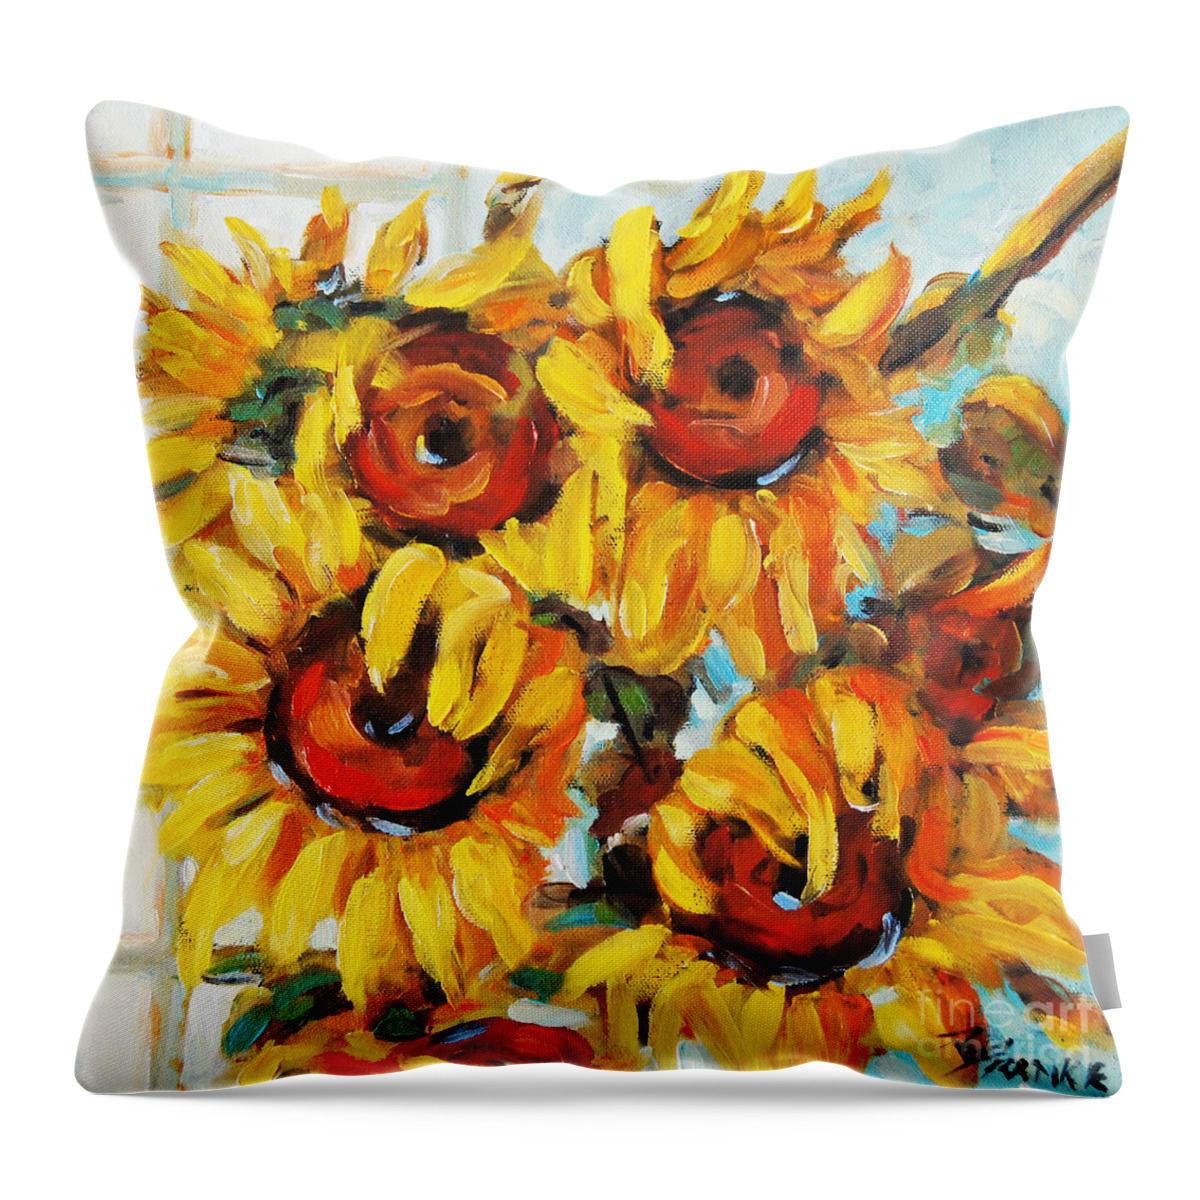 Floral Poppies Scene Throw Pillow featuring the painting Pure Sunshine by Prankearts by Richard T Pranke